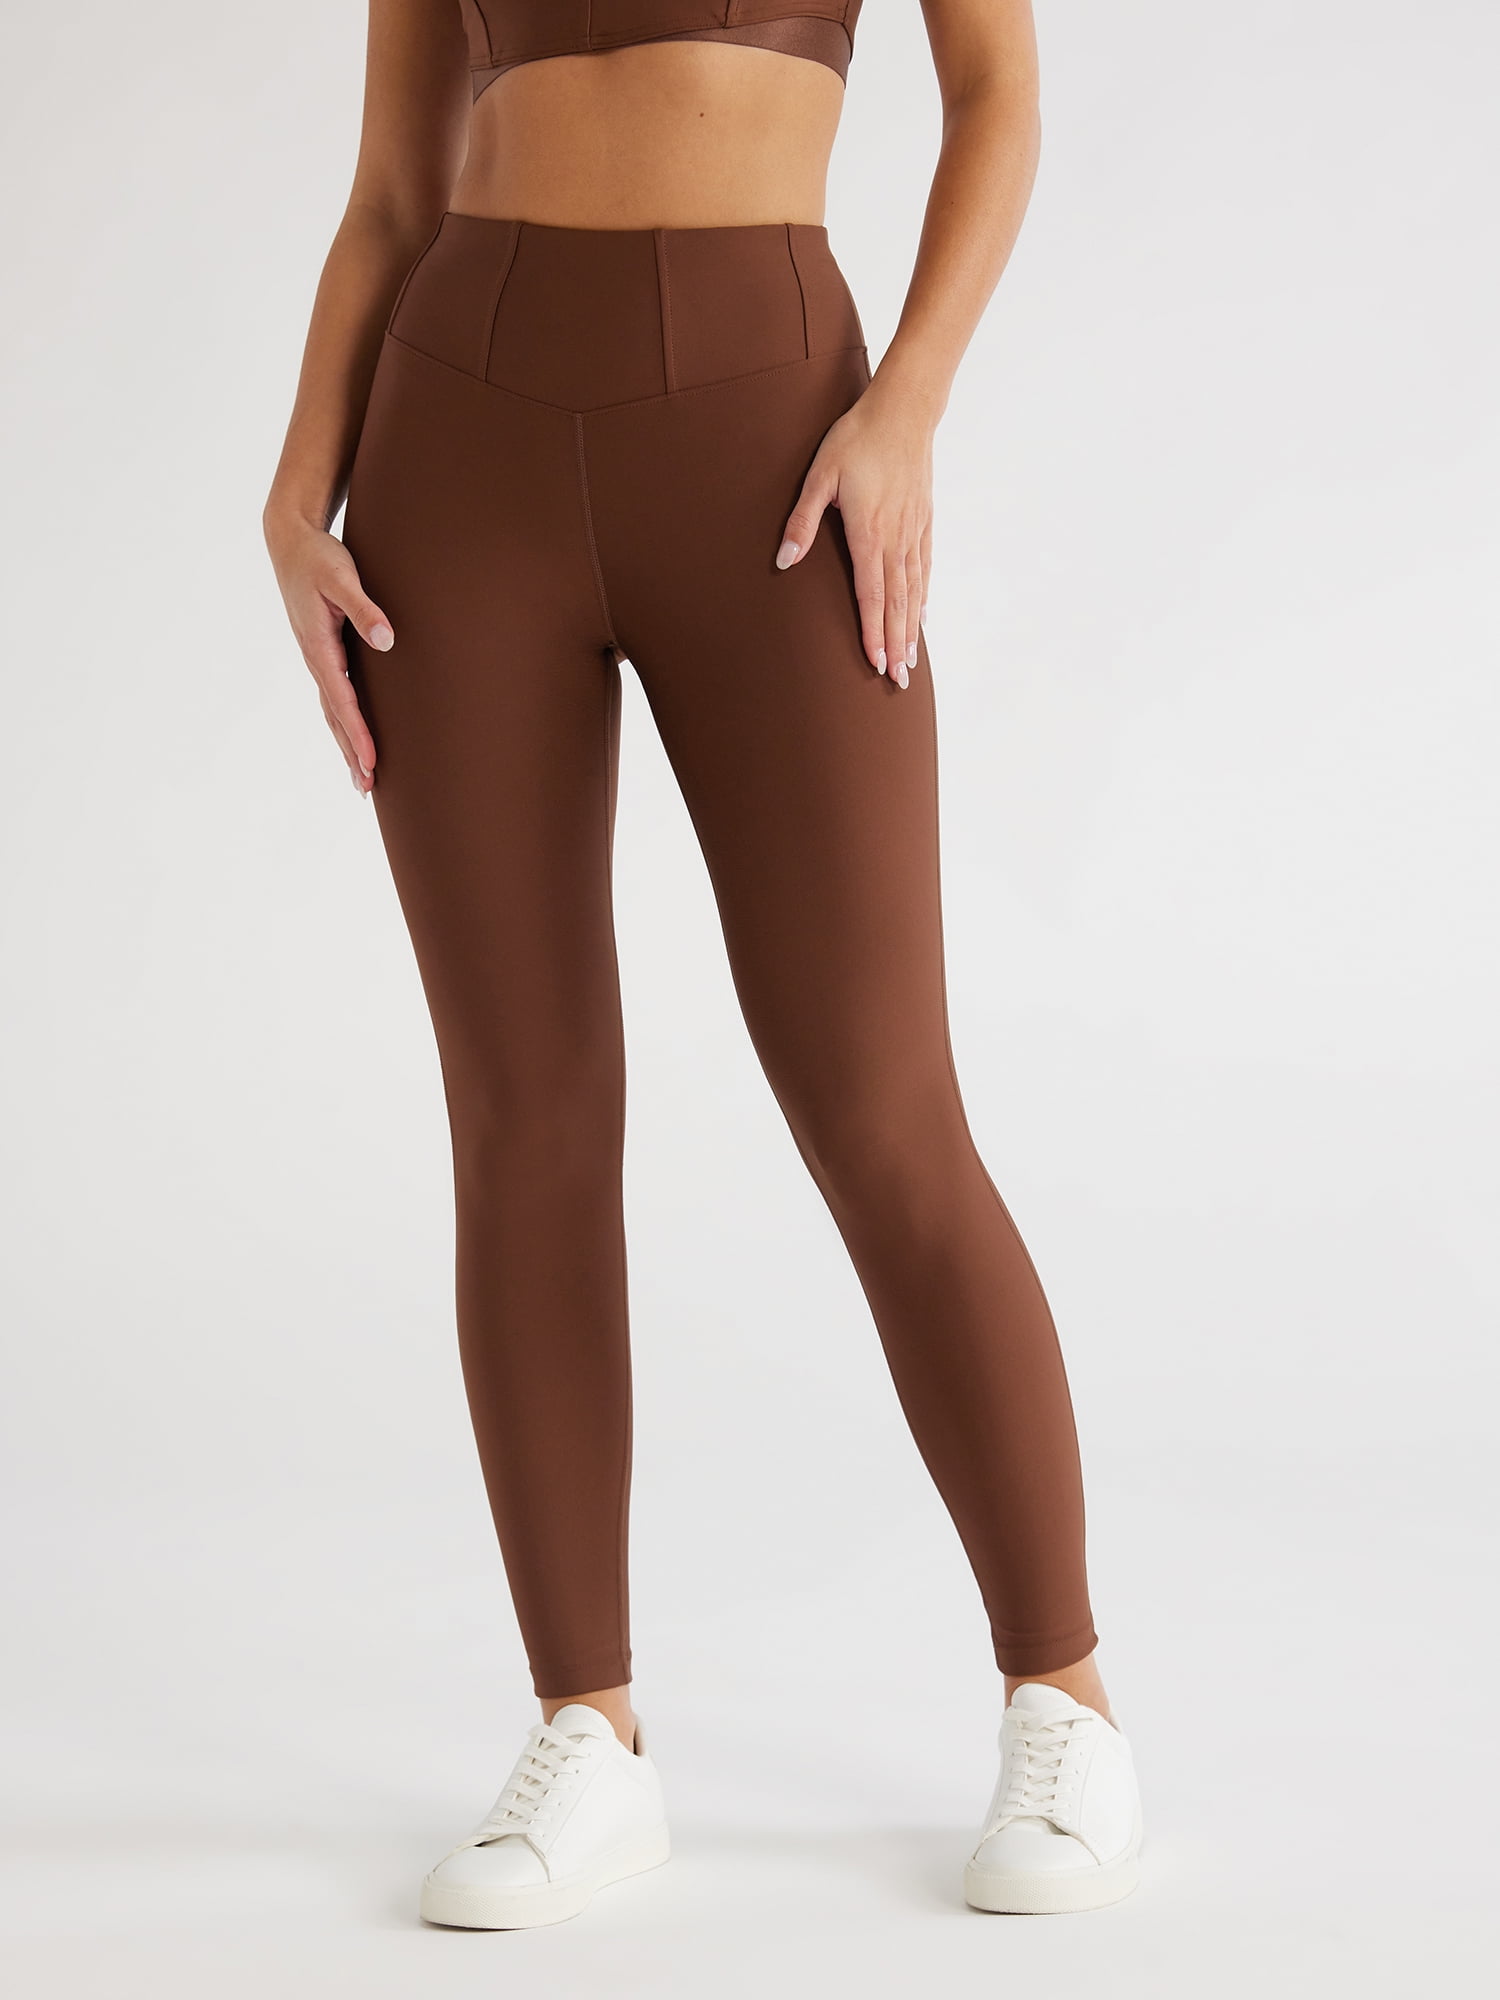 leggings sin costuras, leggings sin costuras Suppliers and